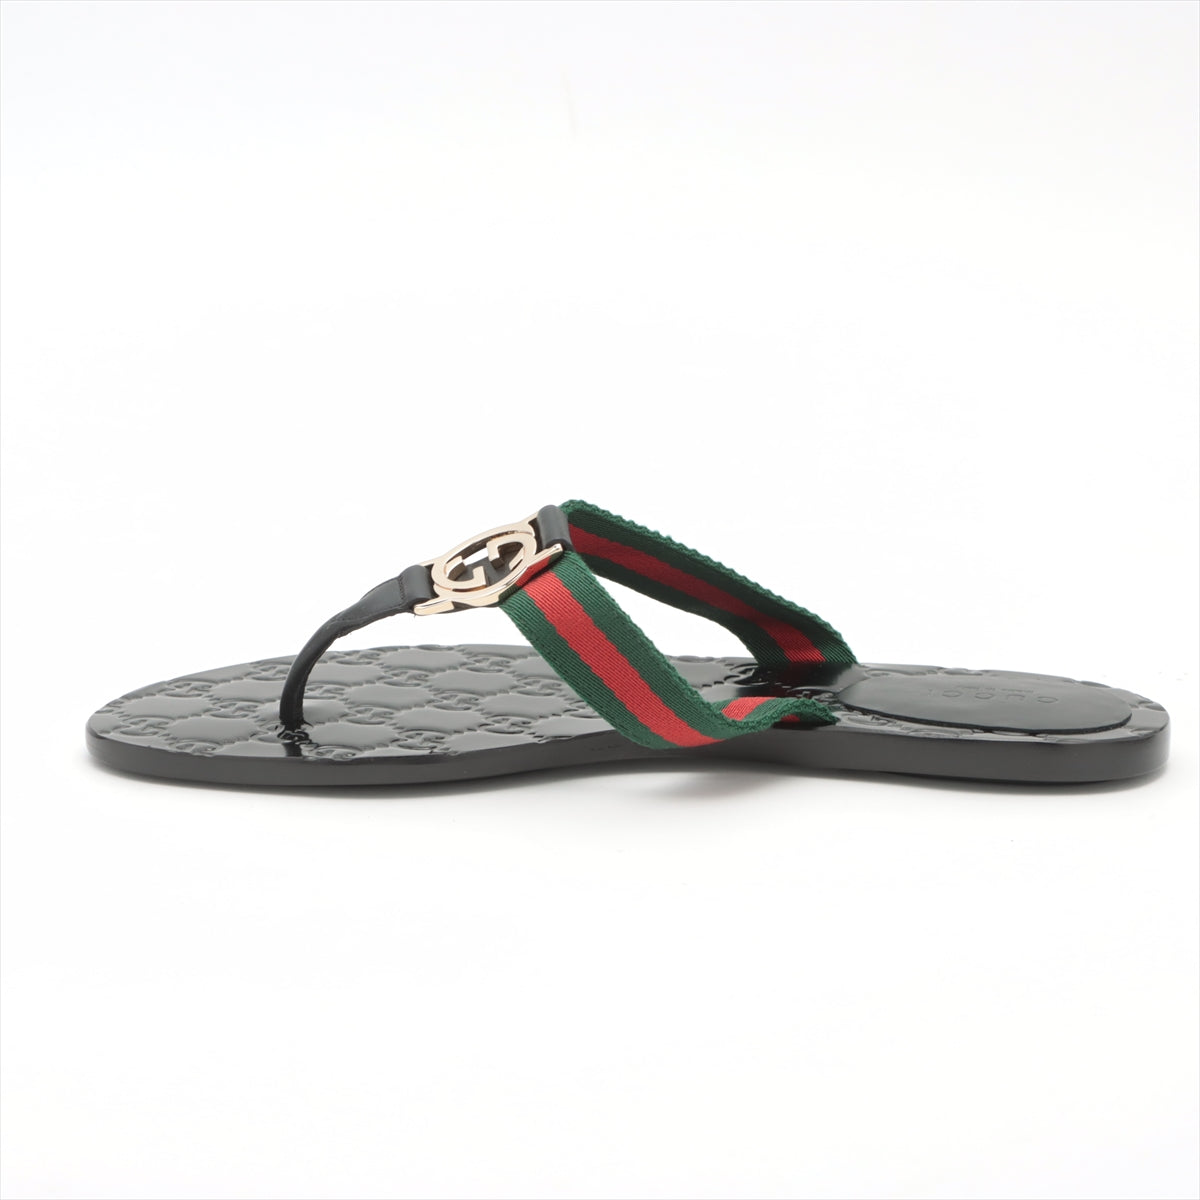 Gucci Interlocking G Canvas & leather Beach sandals 37 Ladies' Black GG Sherry Line box There is a bag